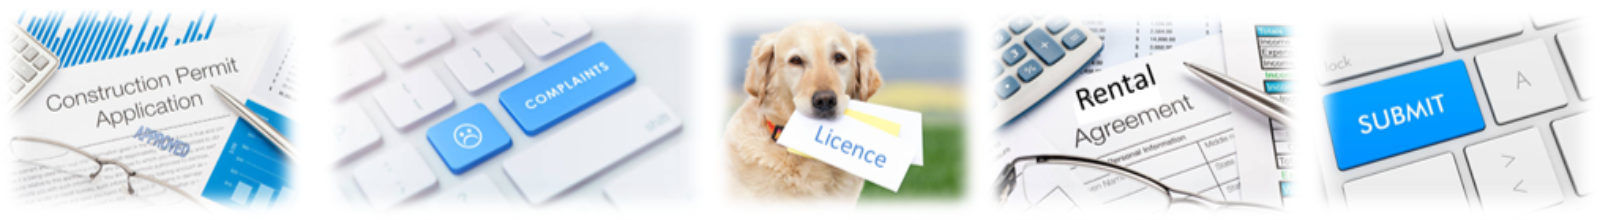 Picture of an application permit, a dog holding a licence form, a rental agreement form, and a submit button indicating some forms available online